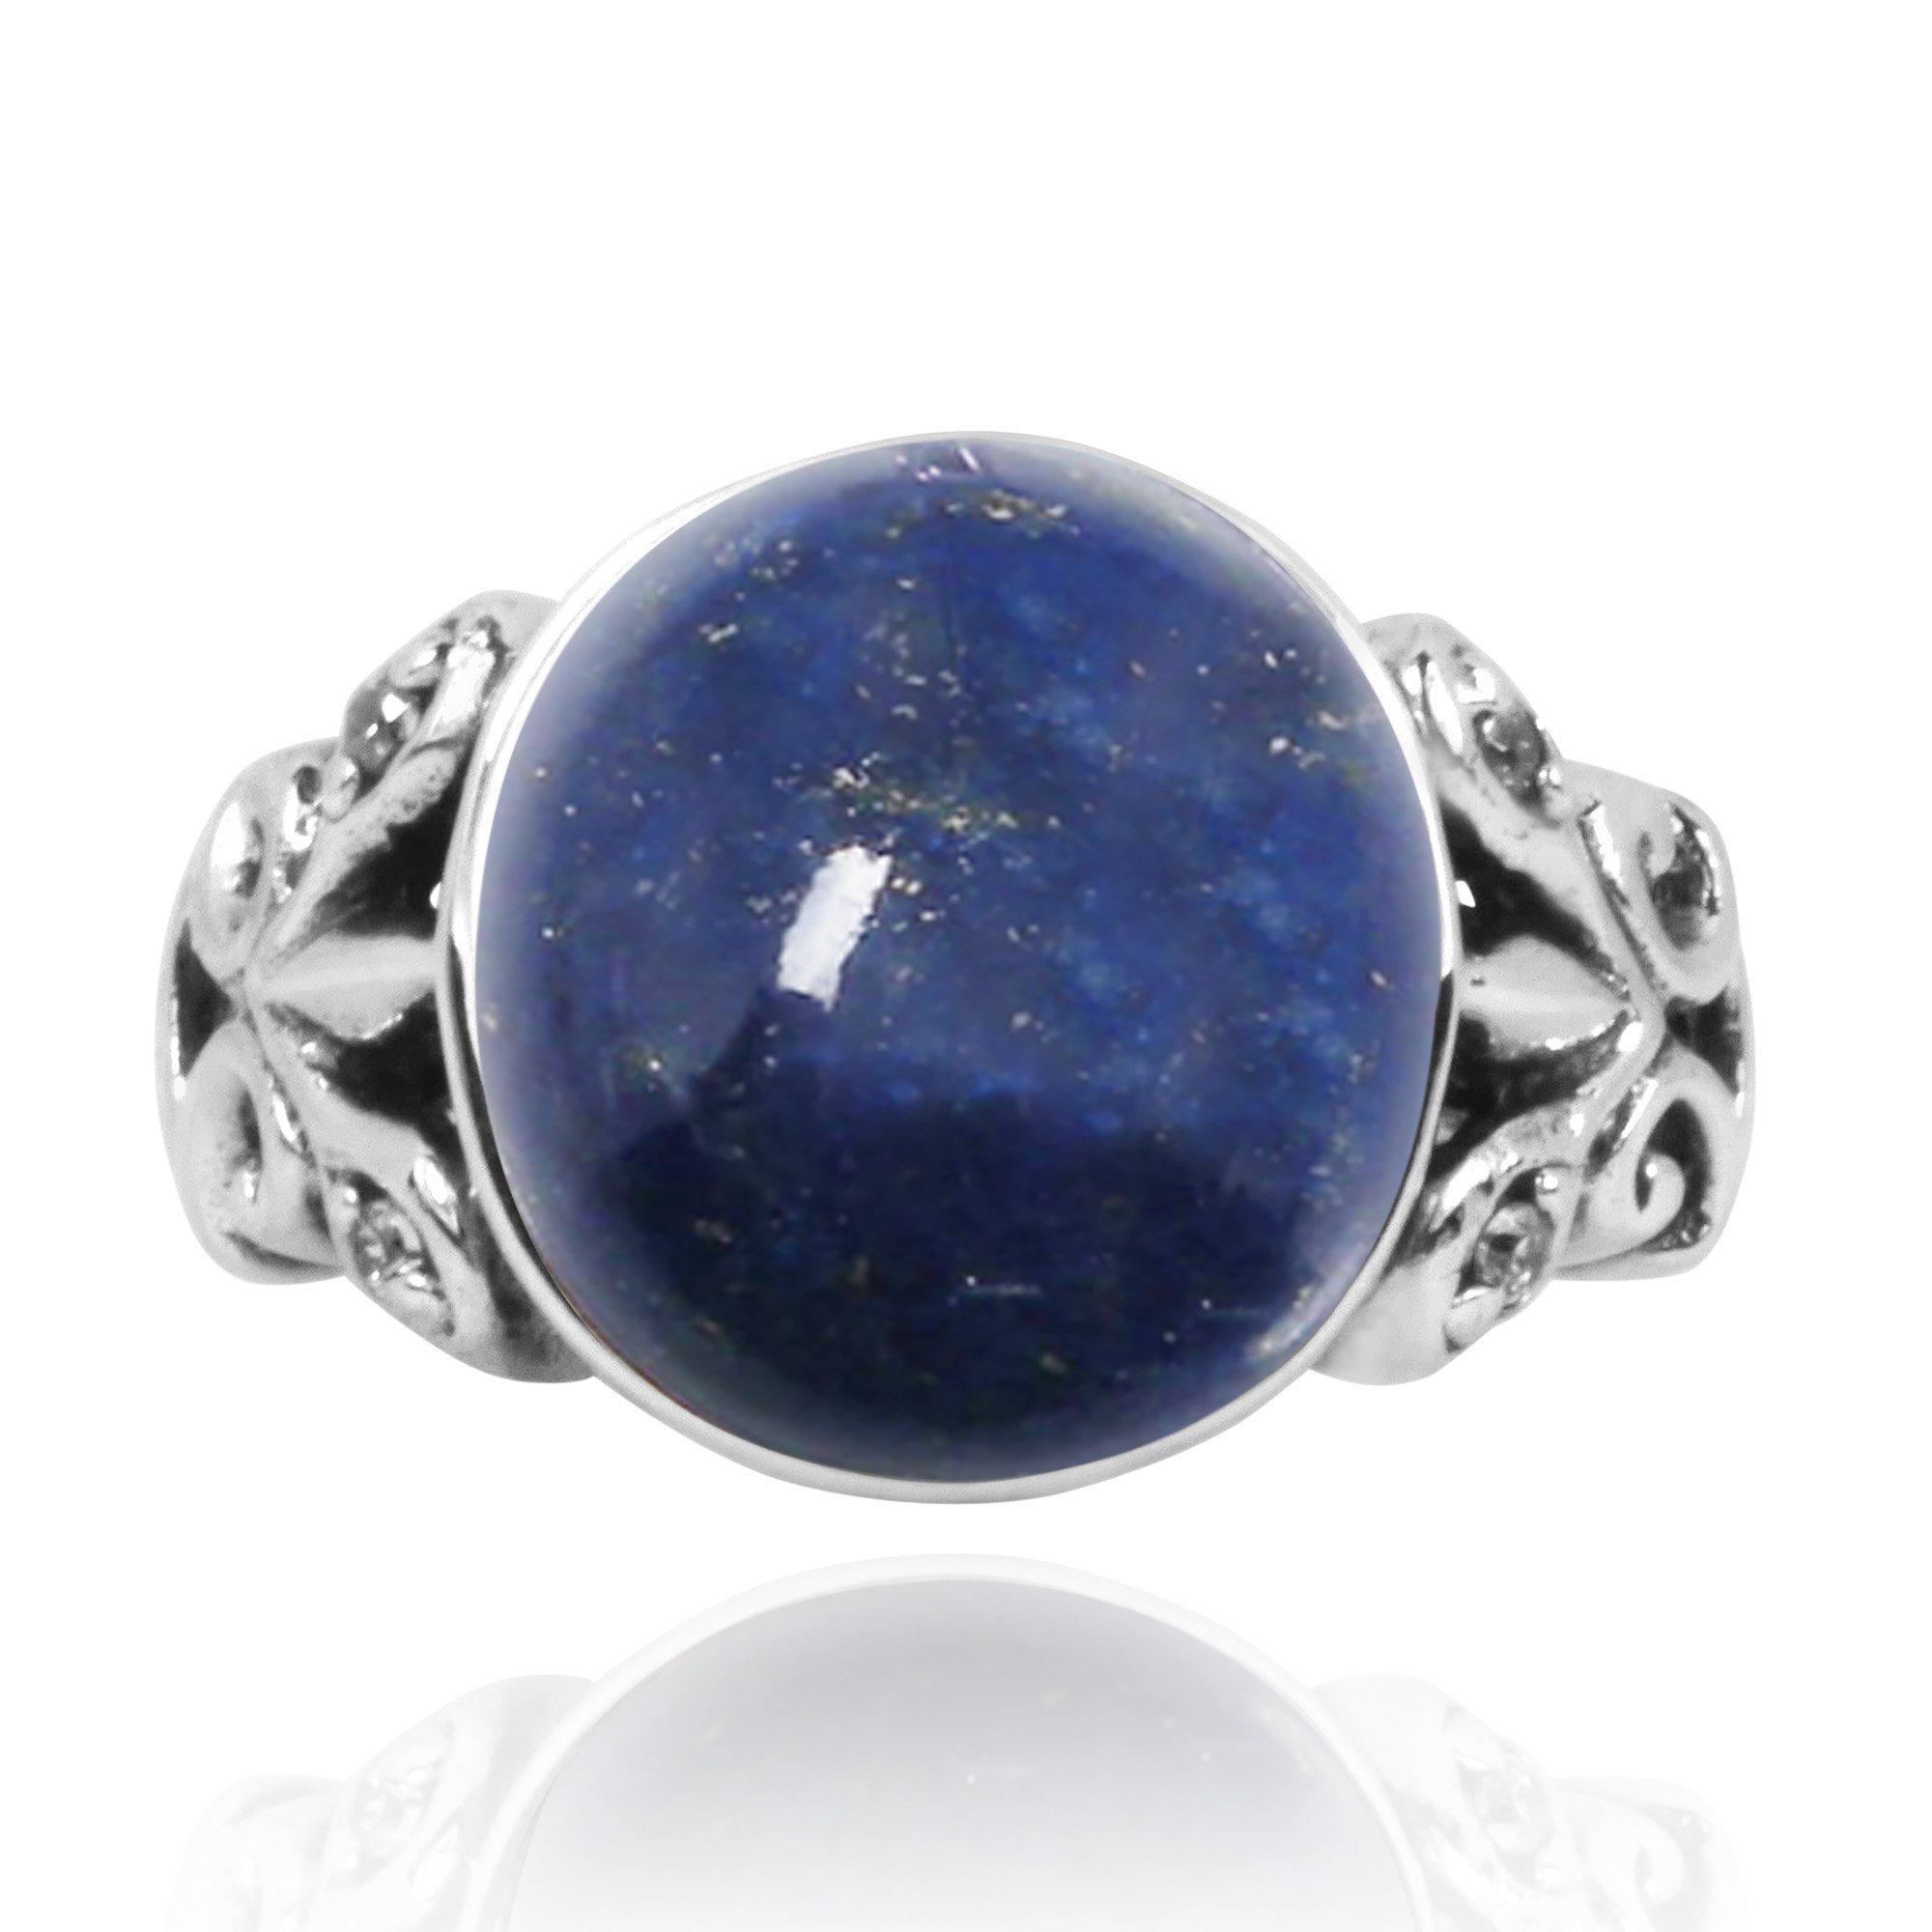 Oval Lapis Oxidized Silver Ring with Butterflies and White CZ with 4 Round Shape White CZ Stones